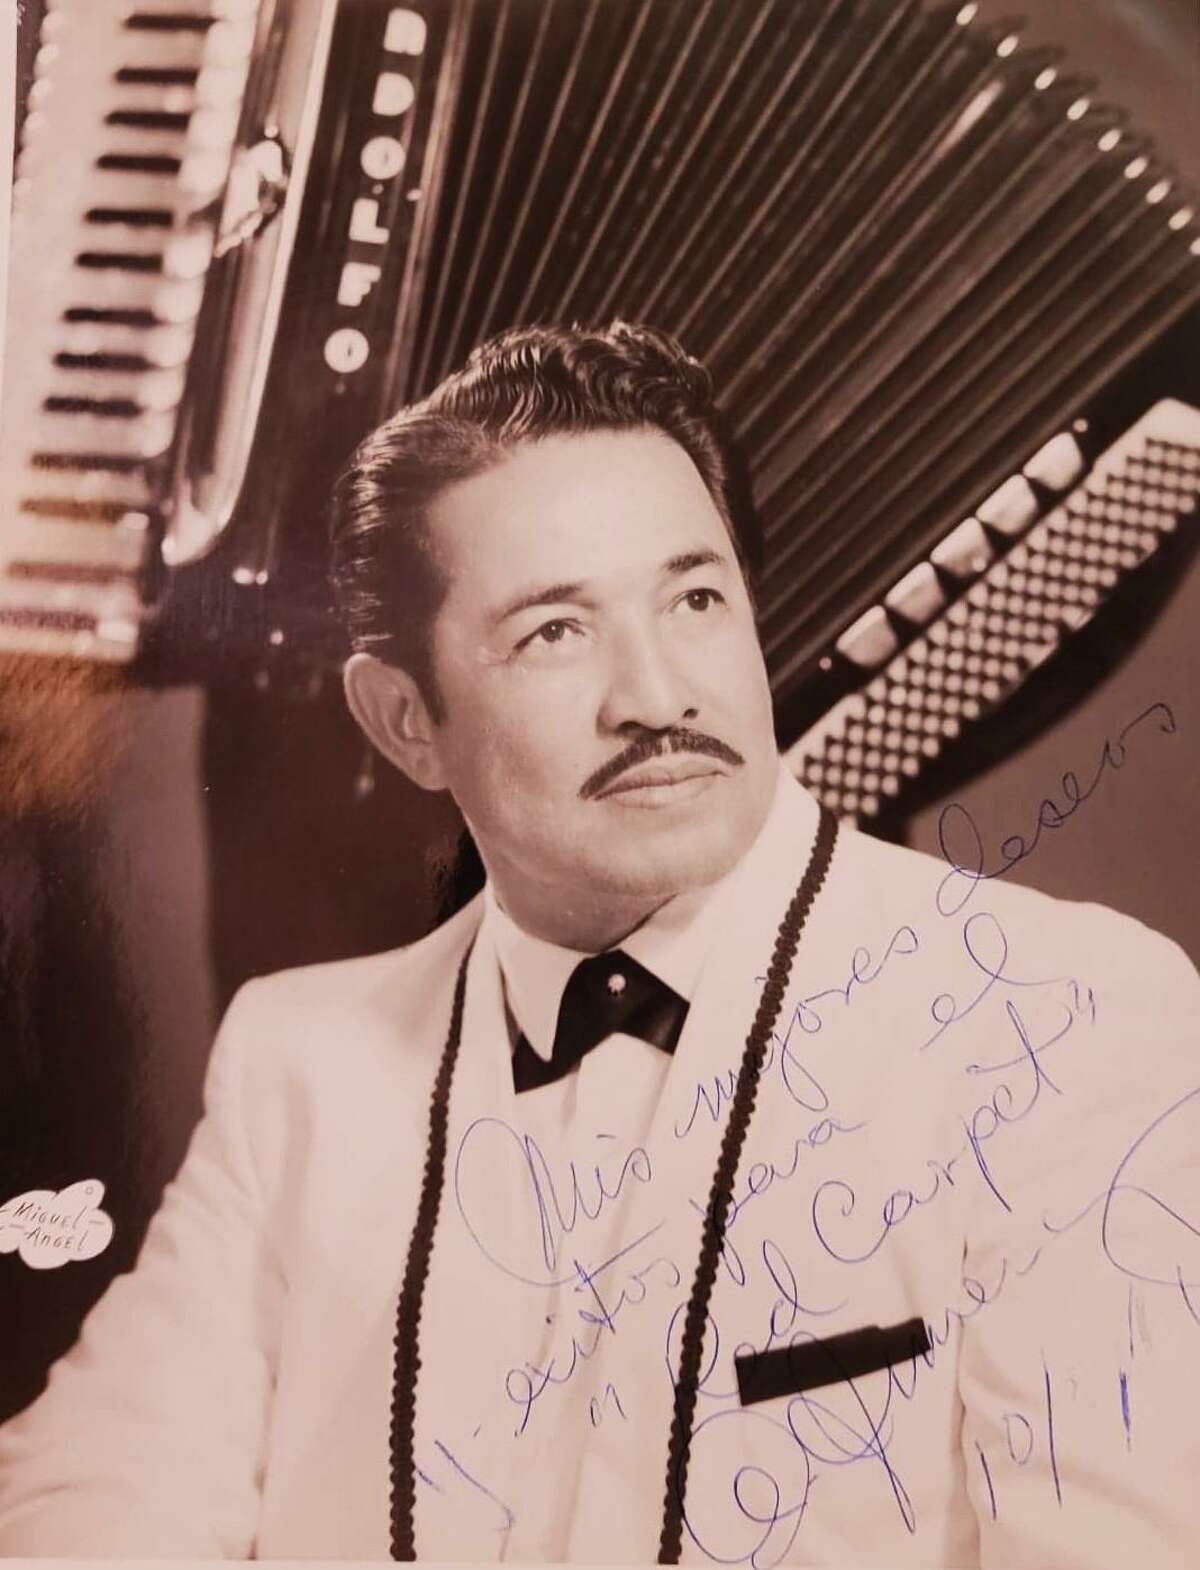 Adolfo Jimenez, an accordionist from Monterrey, Mexico, was the Red Carpet bandleader, whose quartet played for dancing several nights a week.